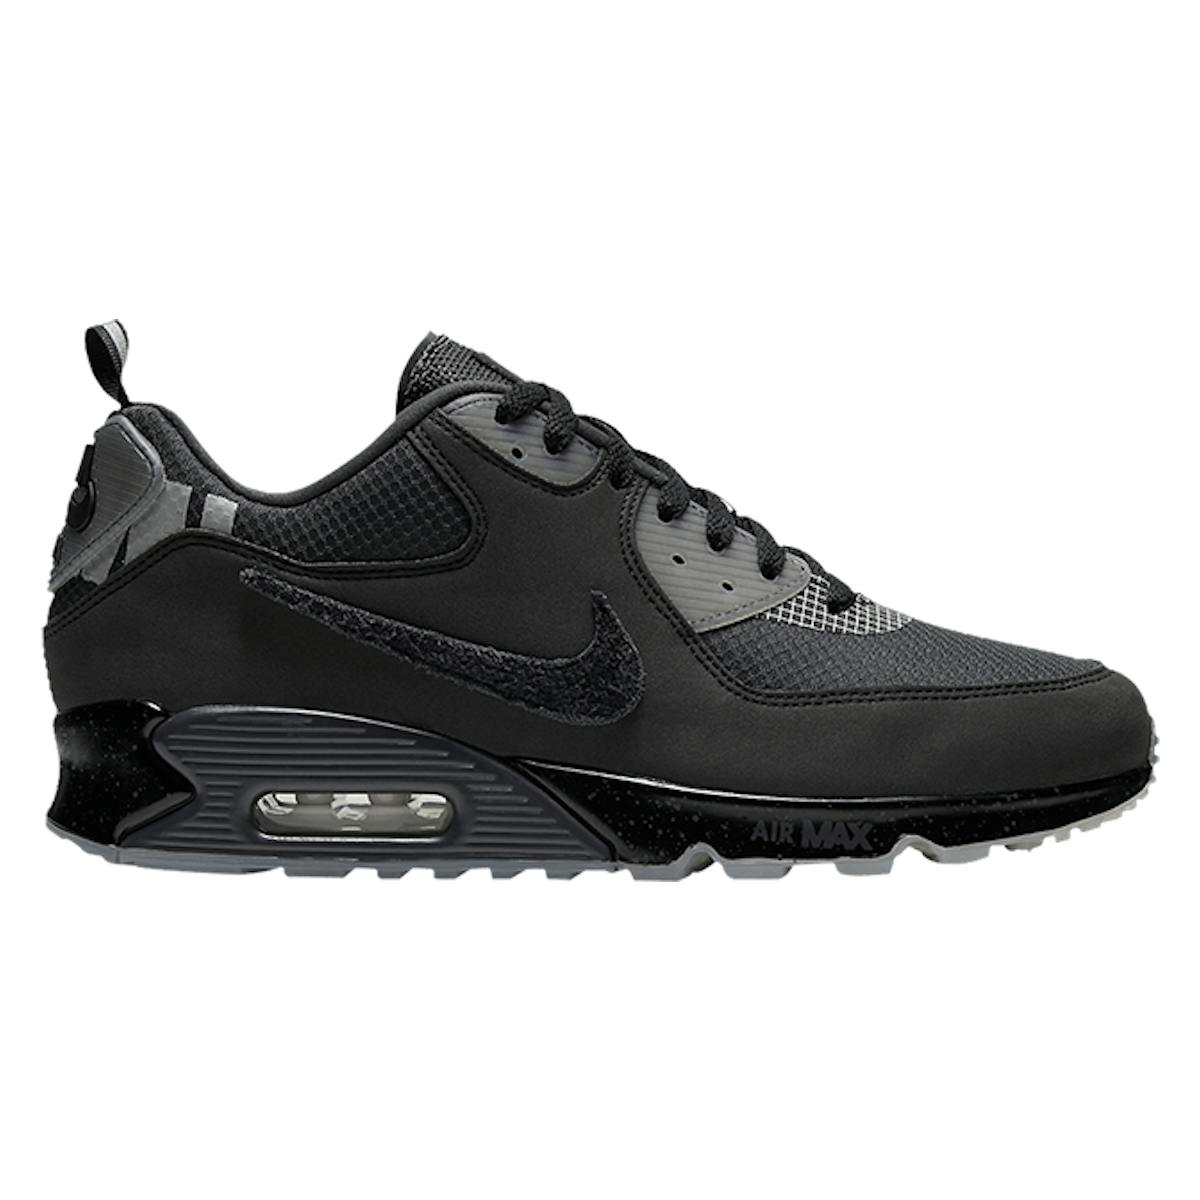 UNDEFEATED x Nike Air Max 90 "Anthracite"